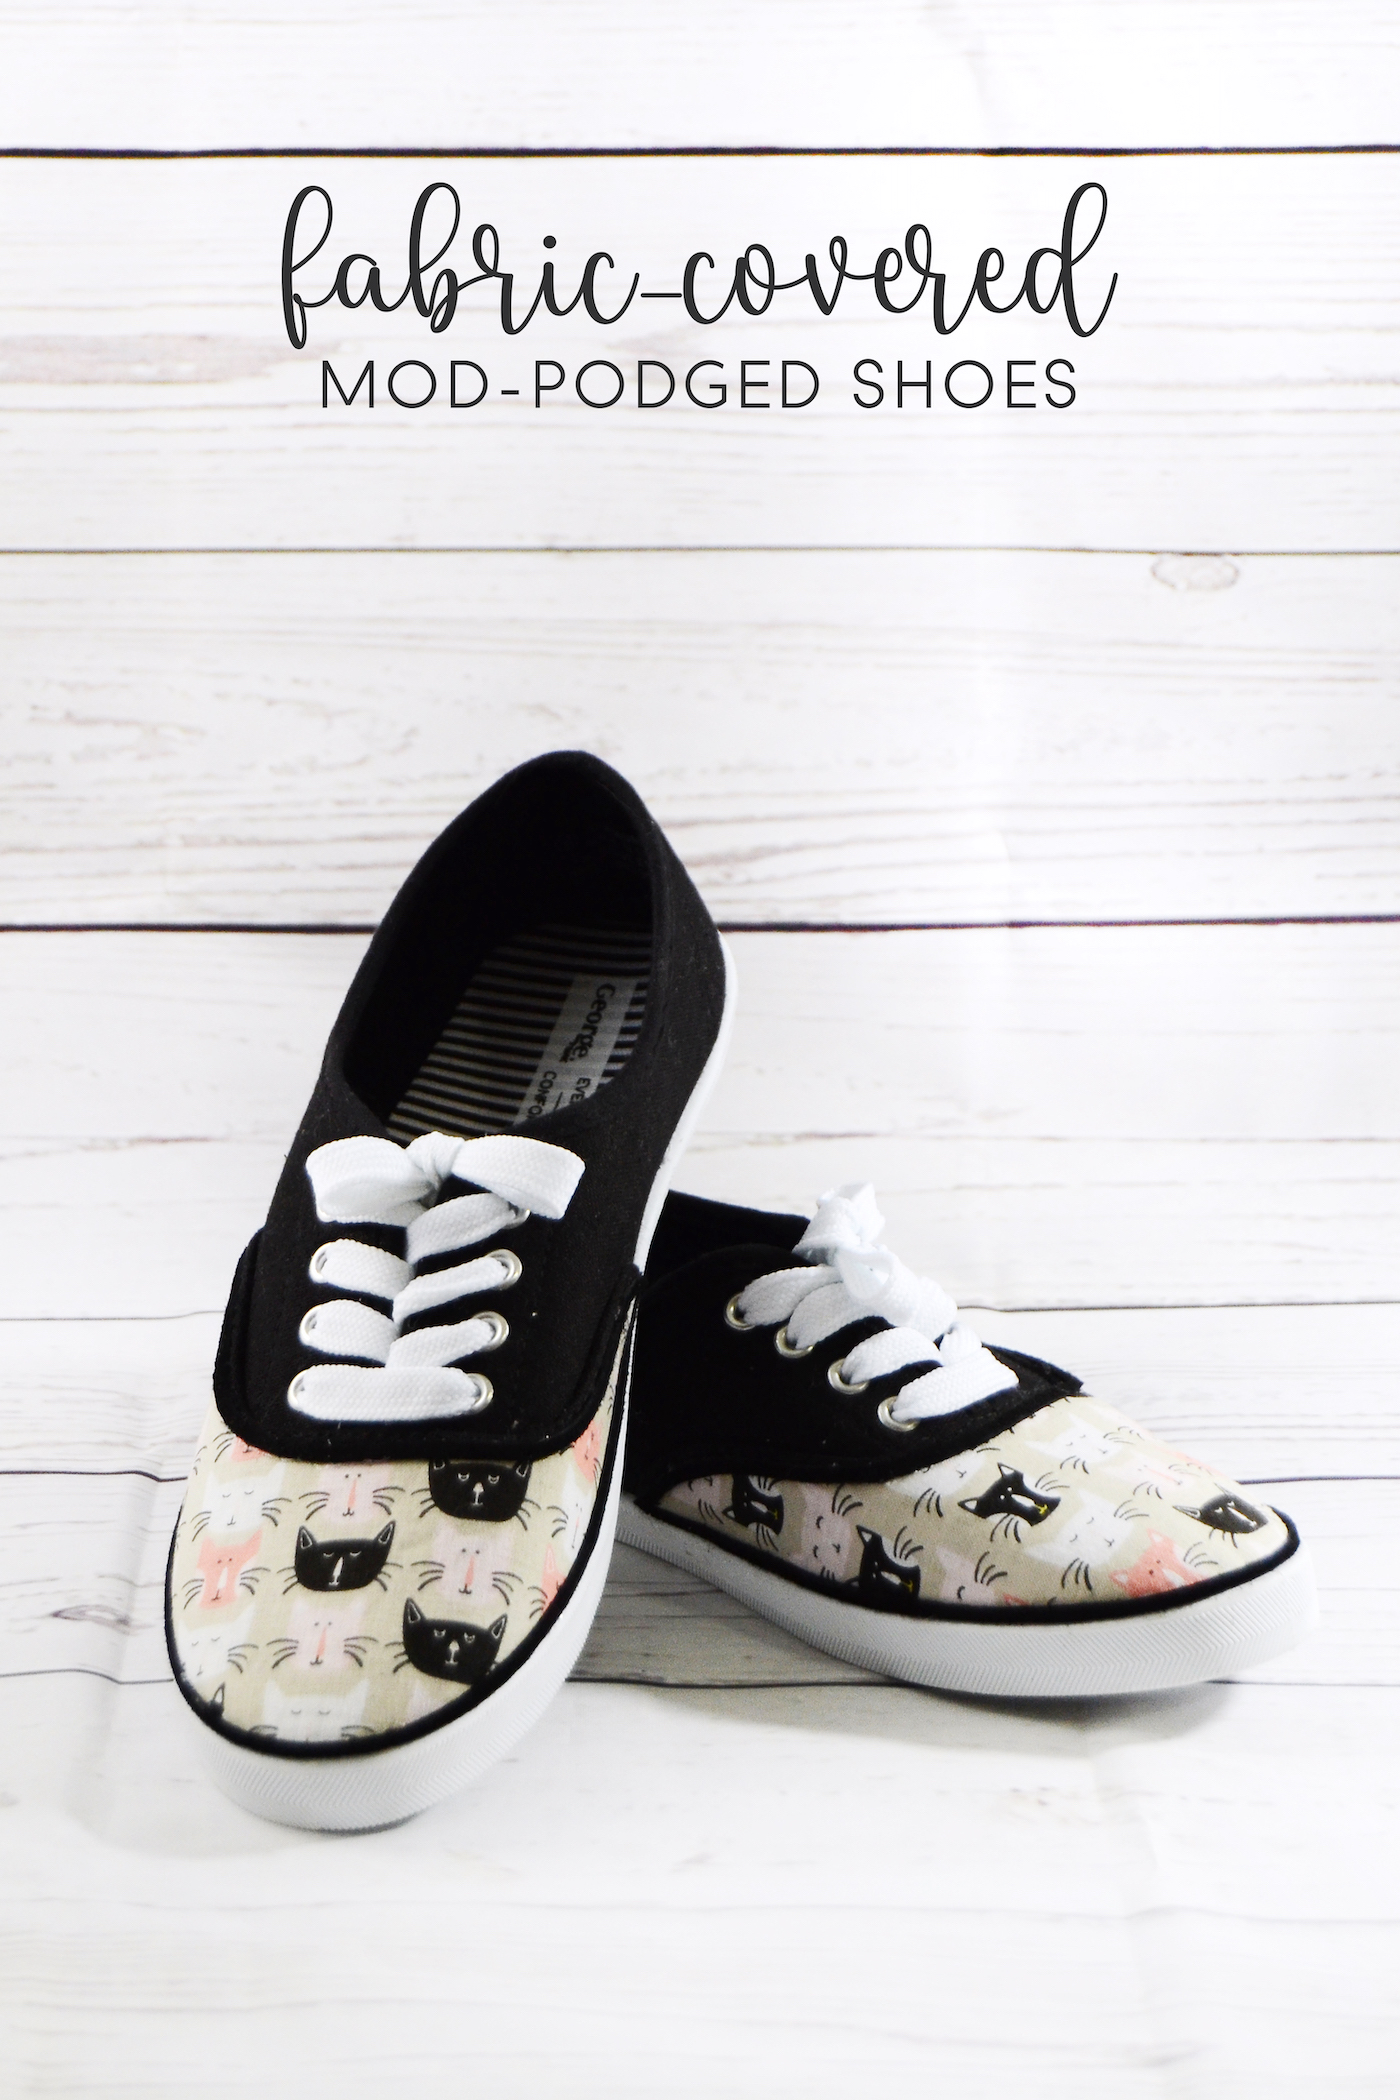 Cover Shoes in Fabric with Mod Podge!